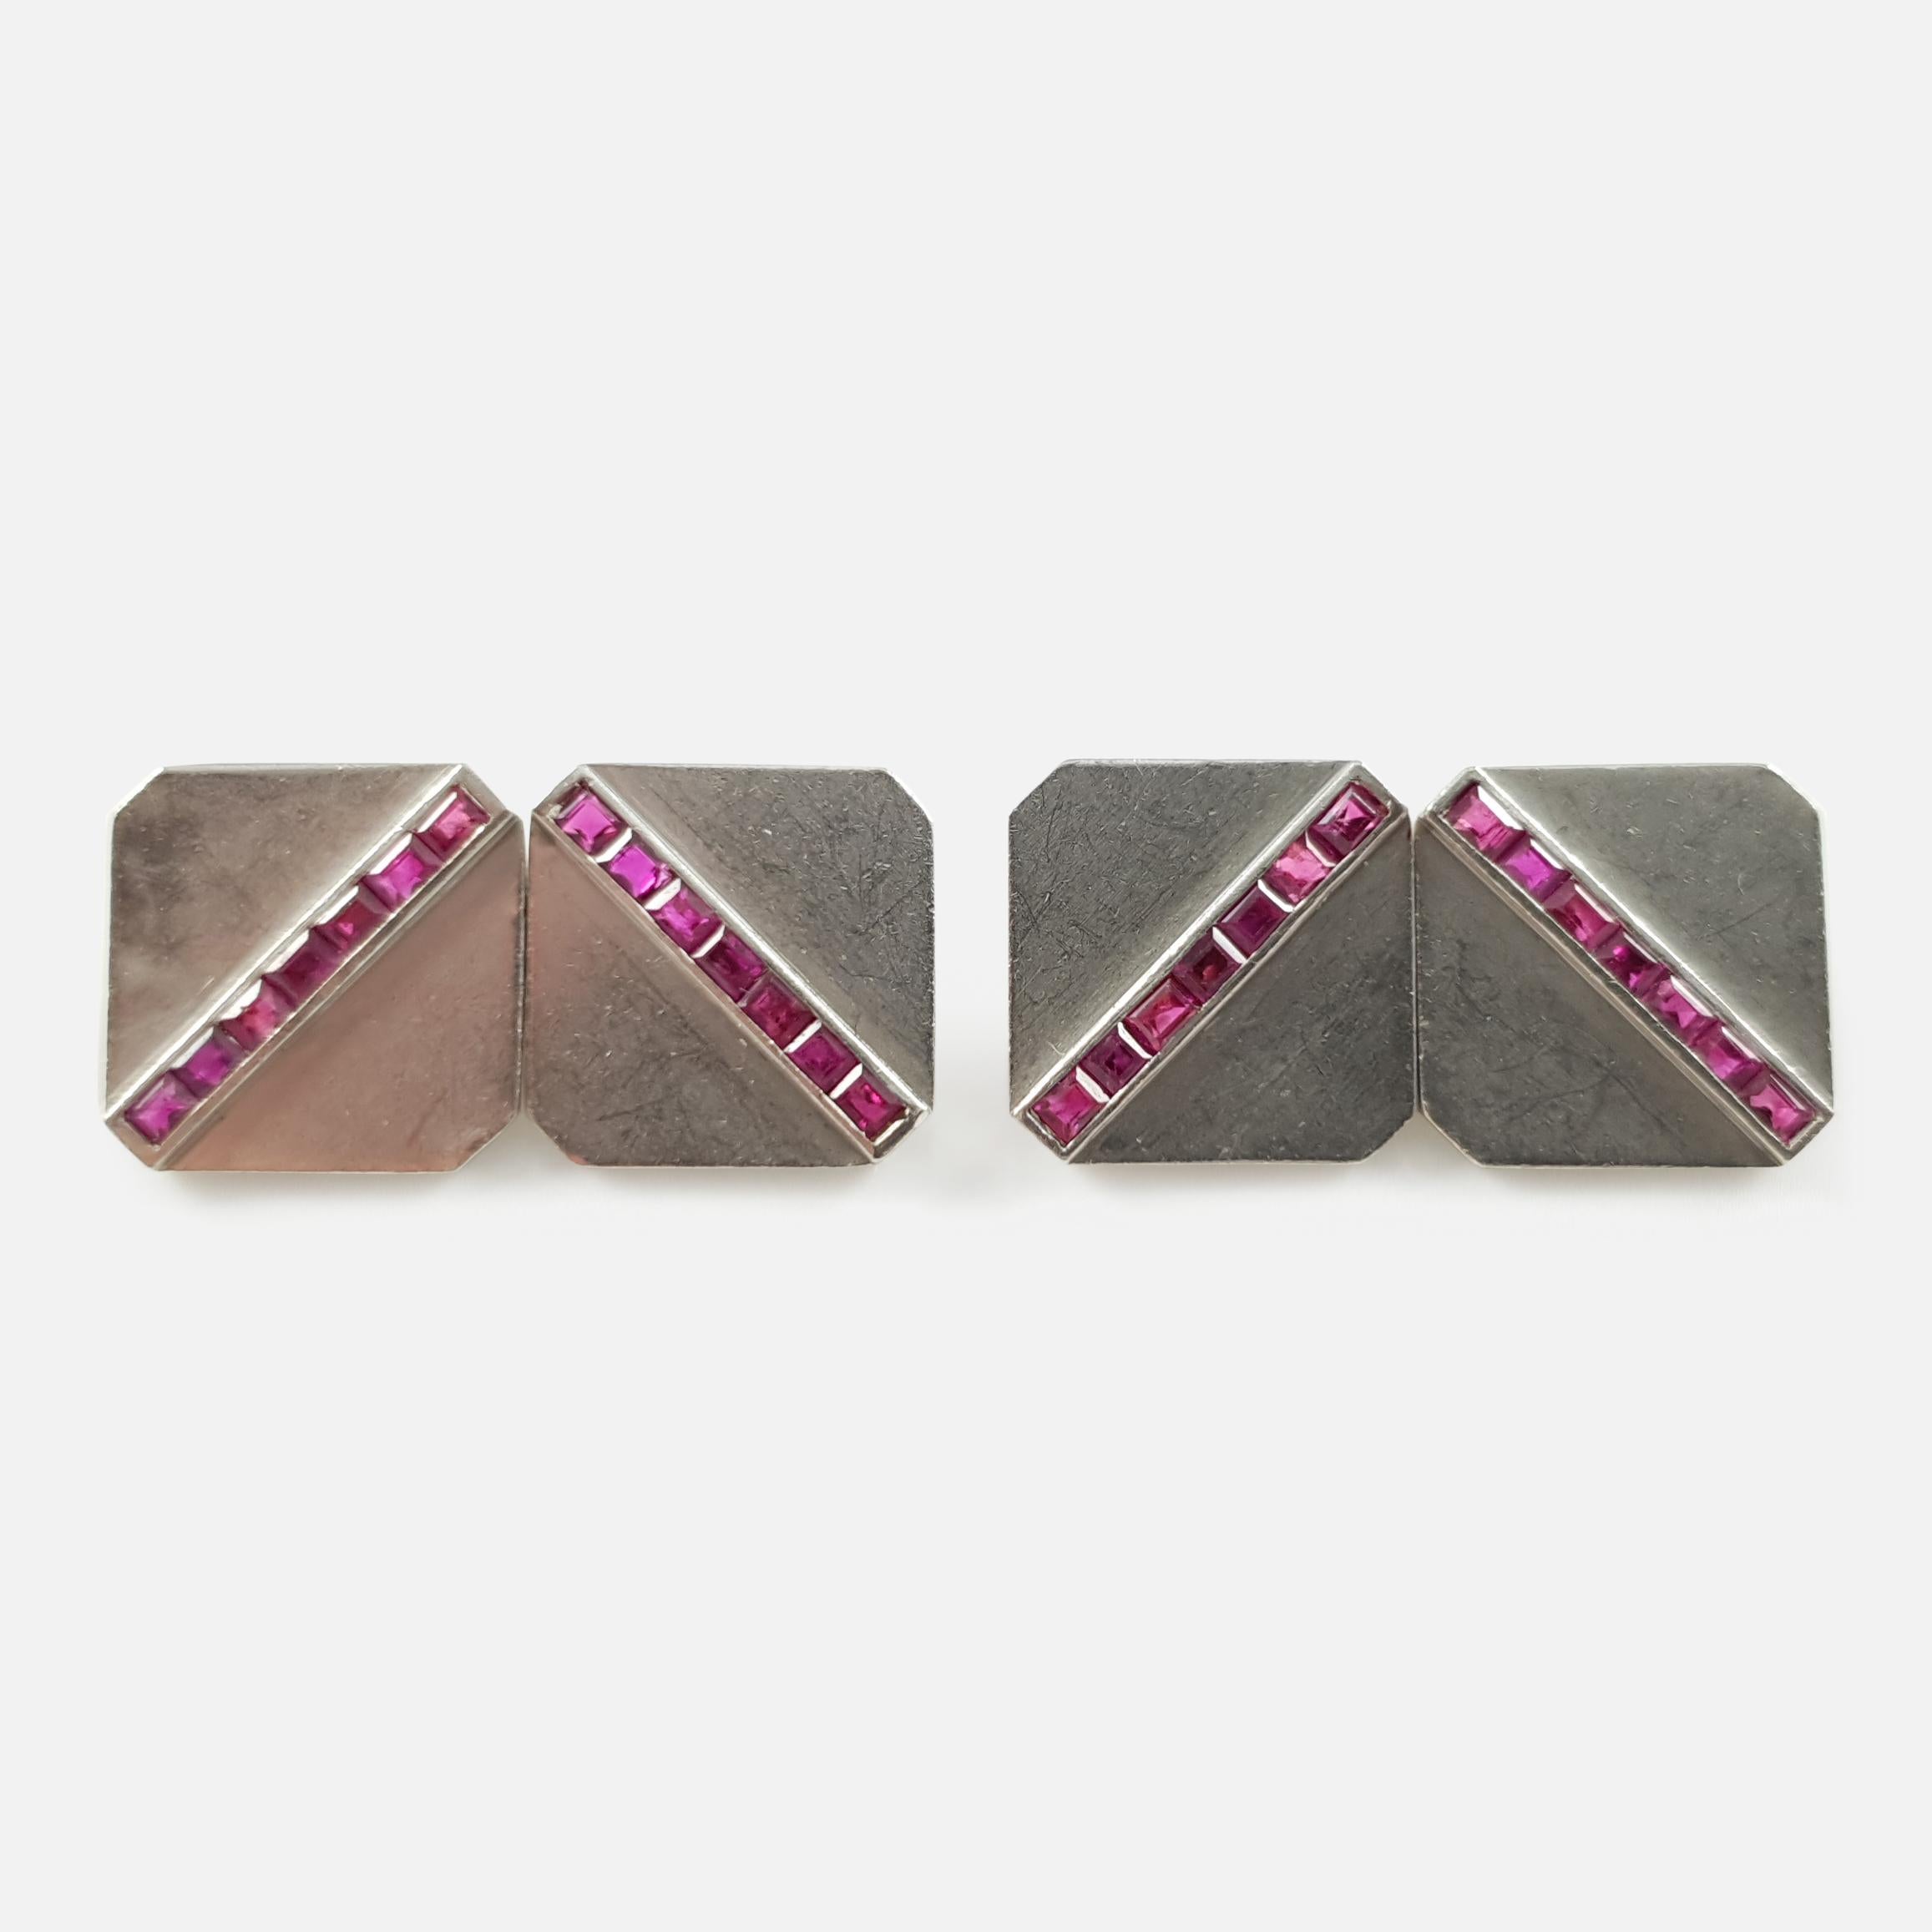 A pair of vintage ruby cufflinks, by Tiffany & Co. The cufflinks are double-sided, each octagonal panel is set with a diagonal row of baguette-cut rubies, with chain-link connectors.  The chain-link connectors are stamped '14' to denote 14 karat